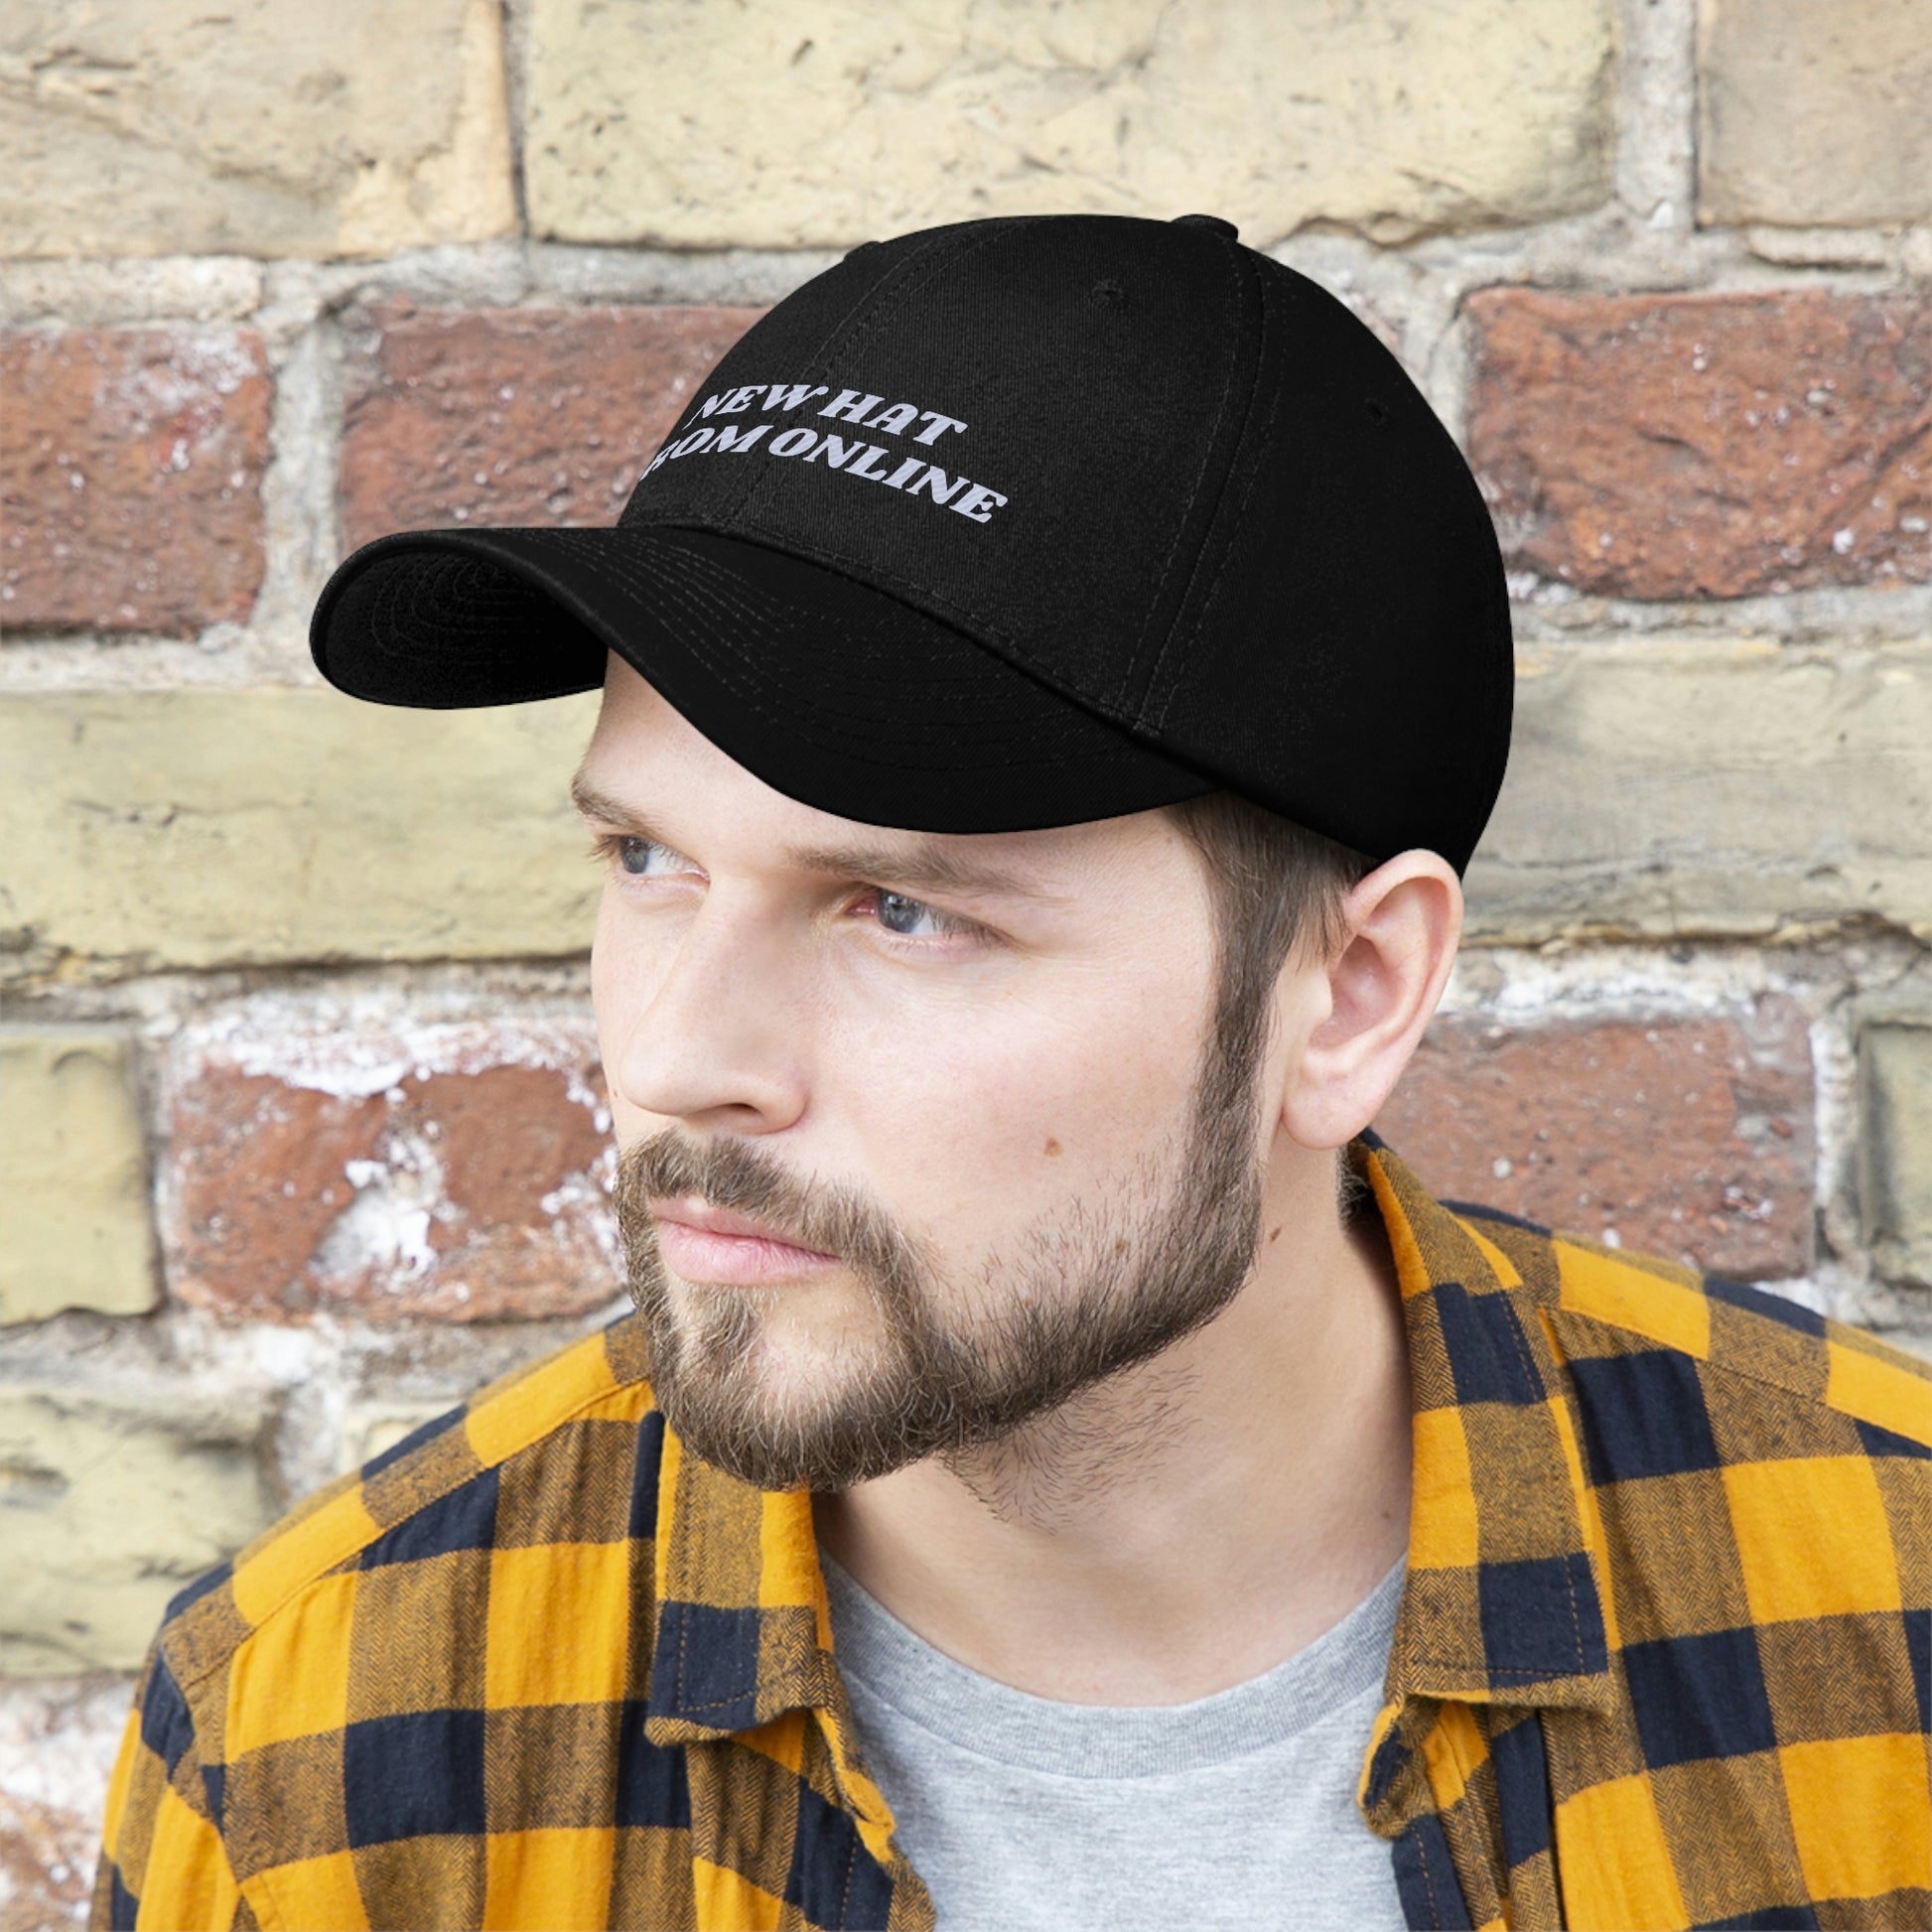 New Hat From Online" Hat Store